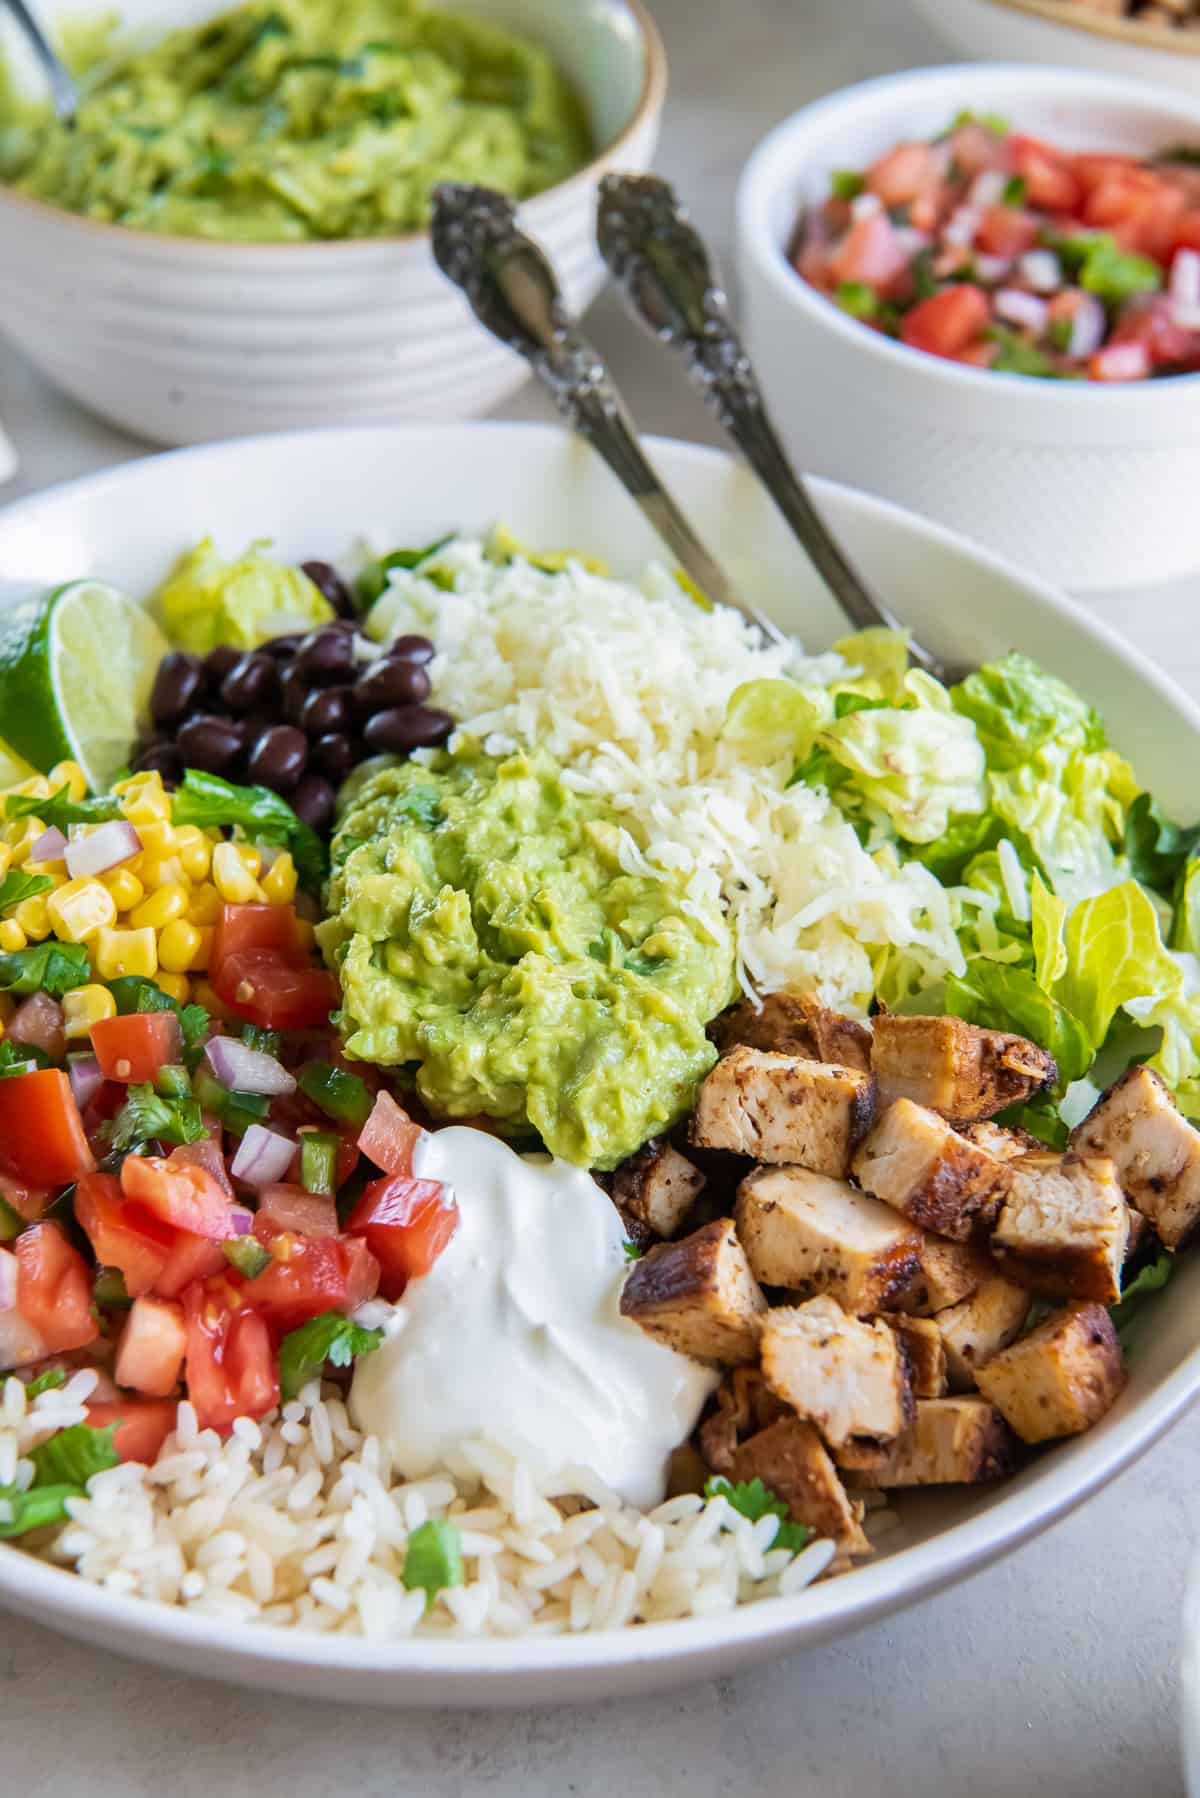 A chicken burrito bowl in a white bowl with forks and small bowls of salsa and guacamole behind it.